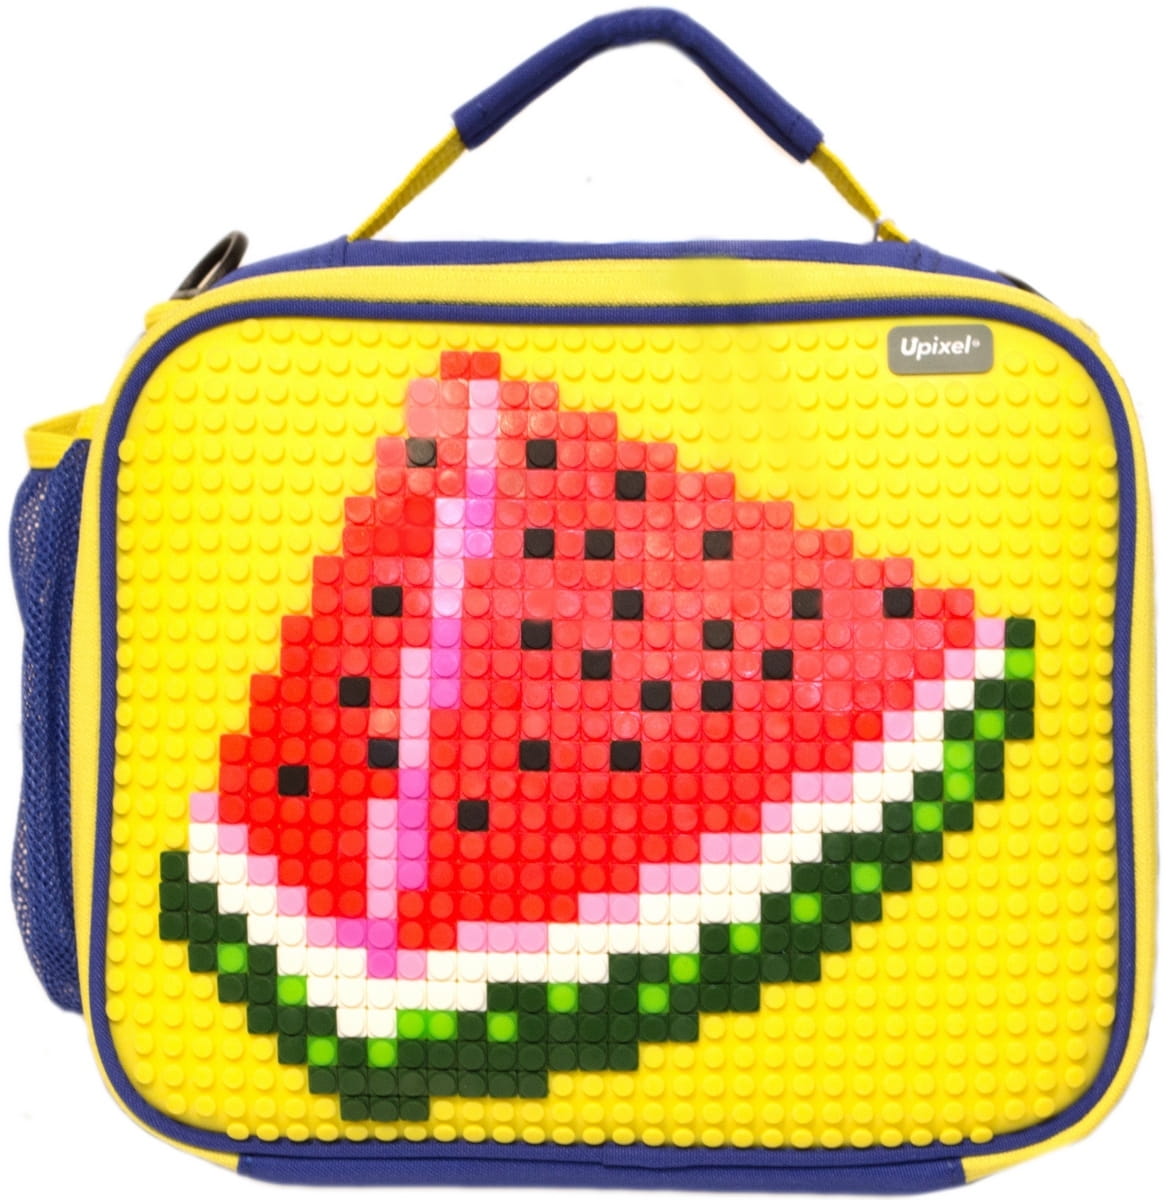   Upixel Bright Colors Lunch Box WY-B015 - -